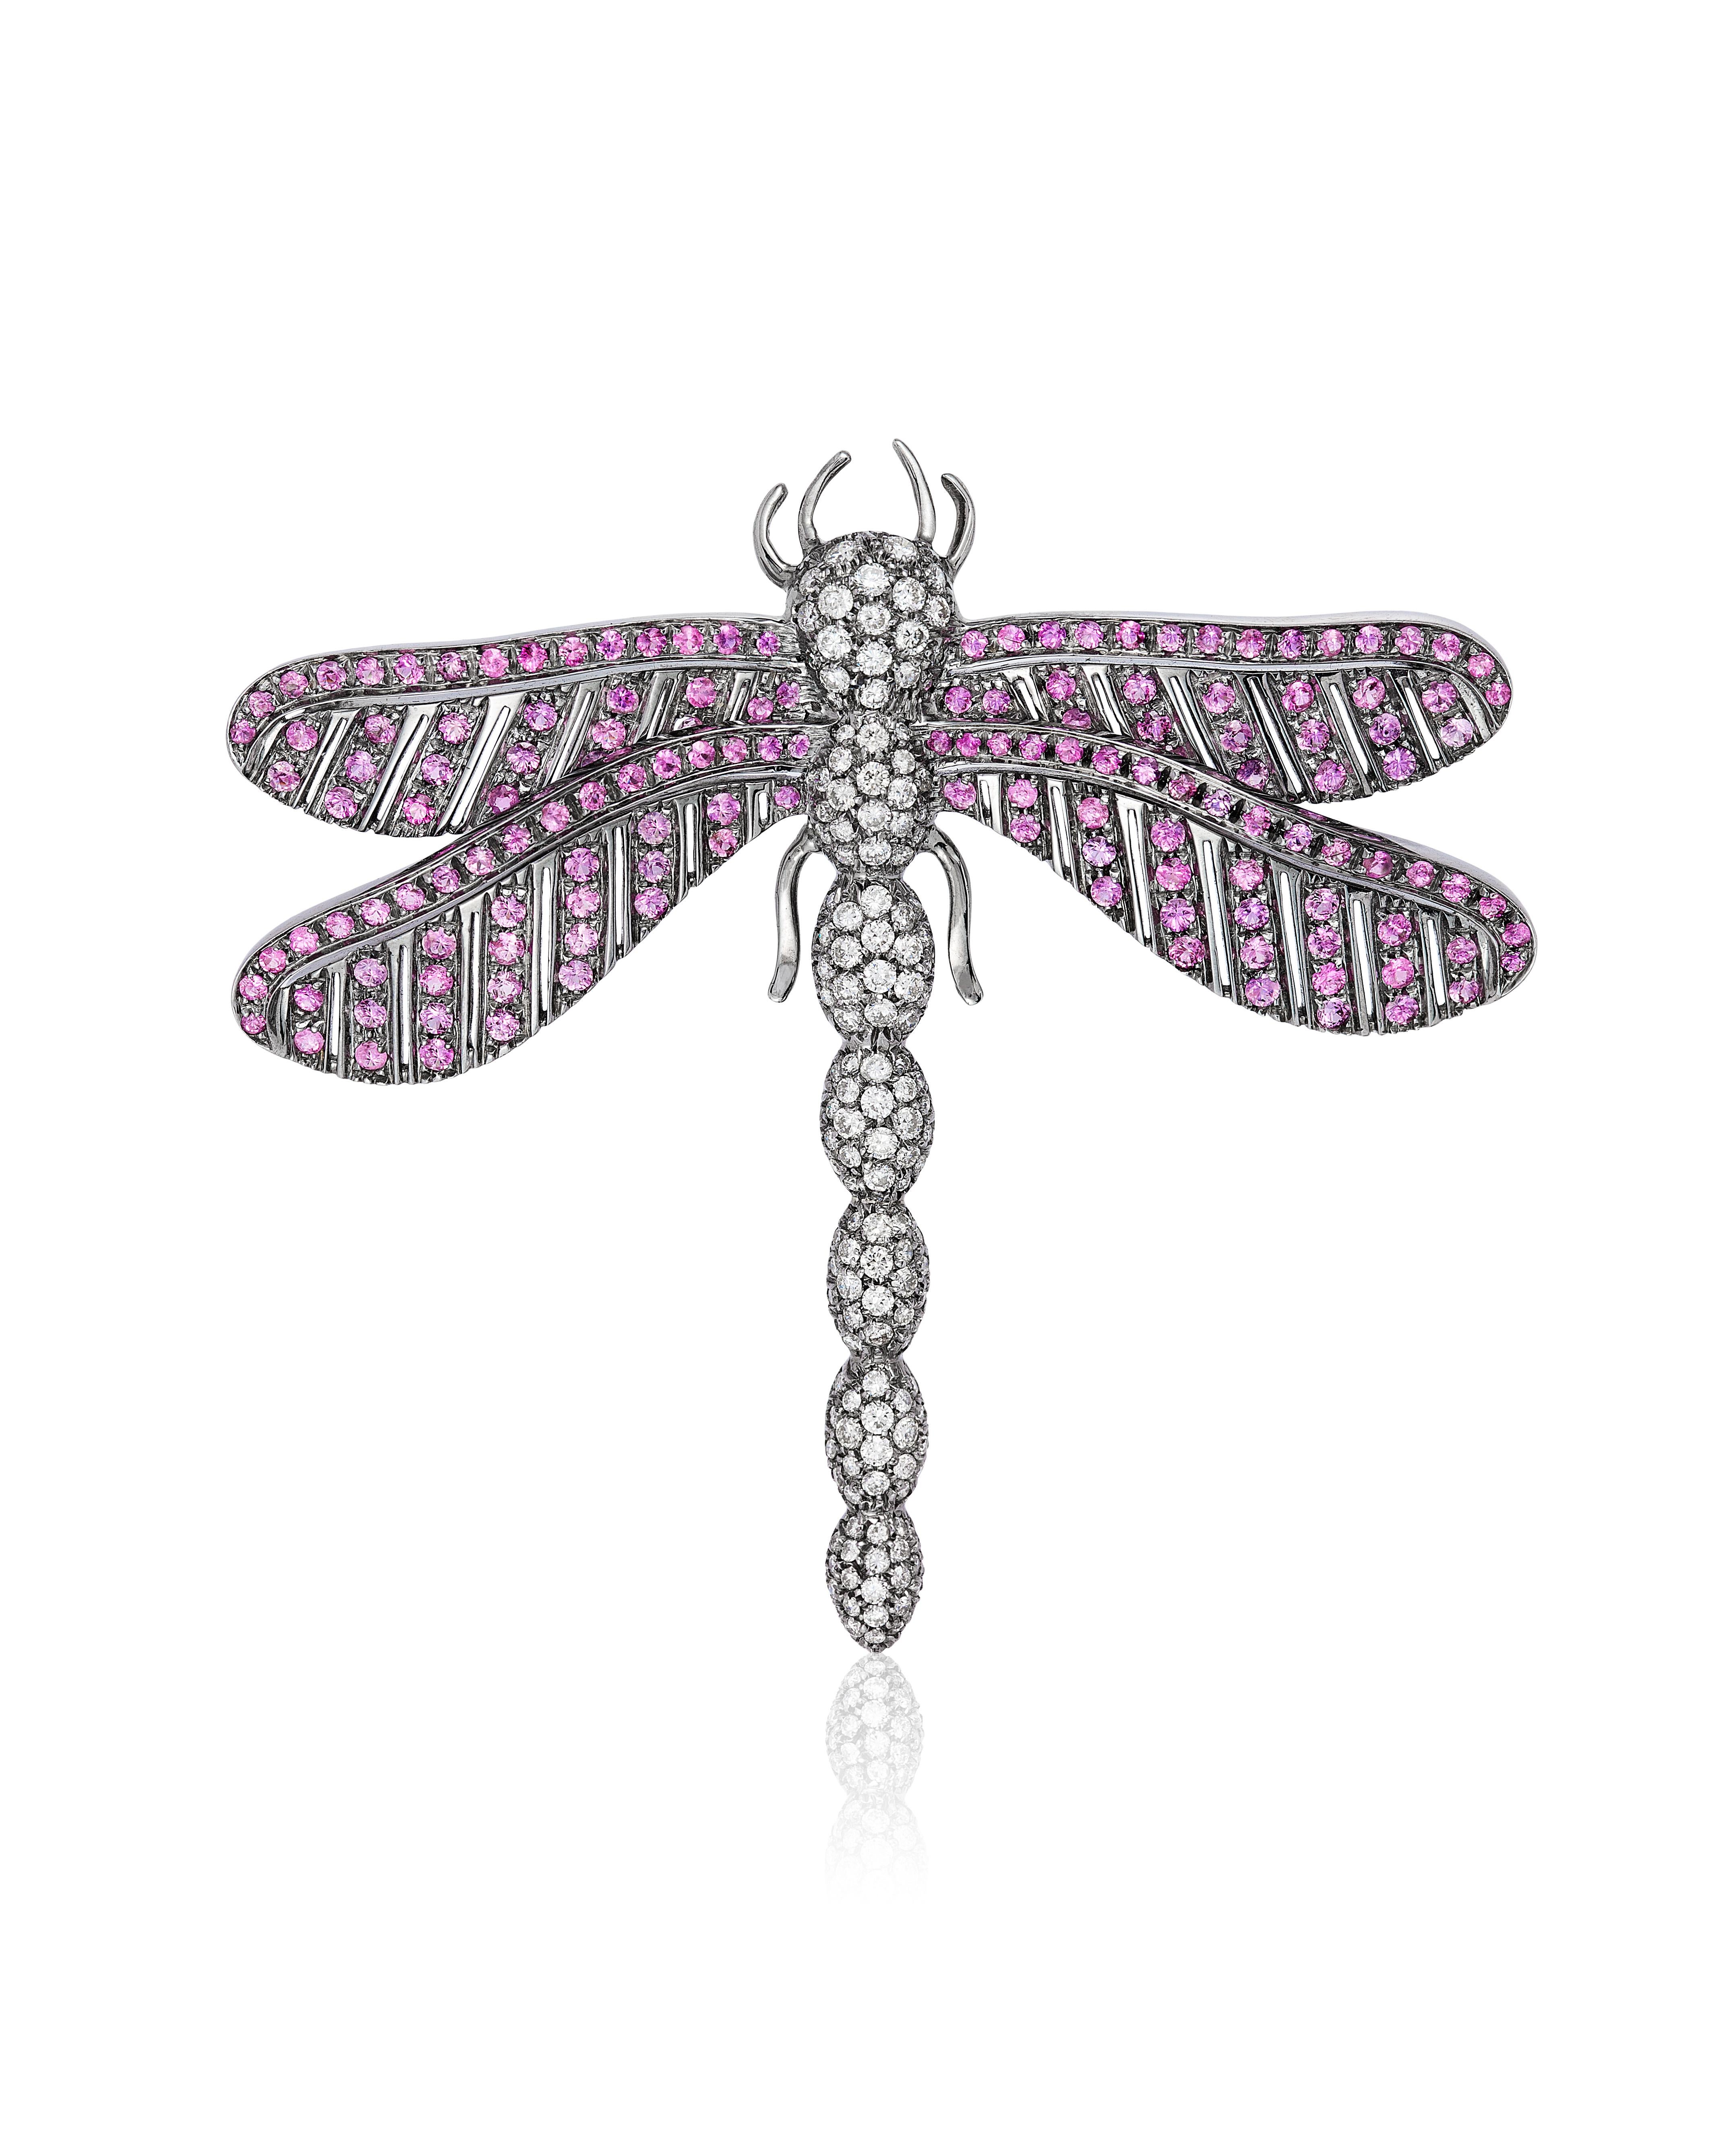 Andreoli Dragonfly Pink Sapphire Diamond Black Rhodium Brooch Pin 18 Karat White. This dragonfly brooch faetures 3.32 carats of F-G-H Color VS-SI Clarity round brilliant diamonds and 4.59 carats of round brilliant pink sapphires. Blackened rhodium